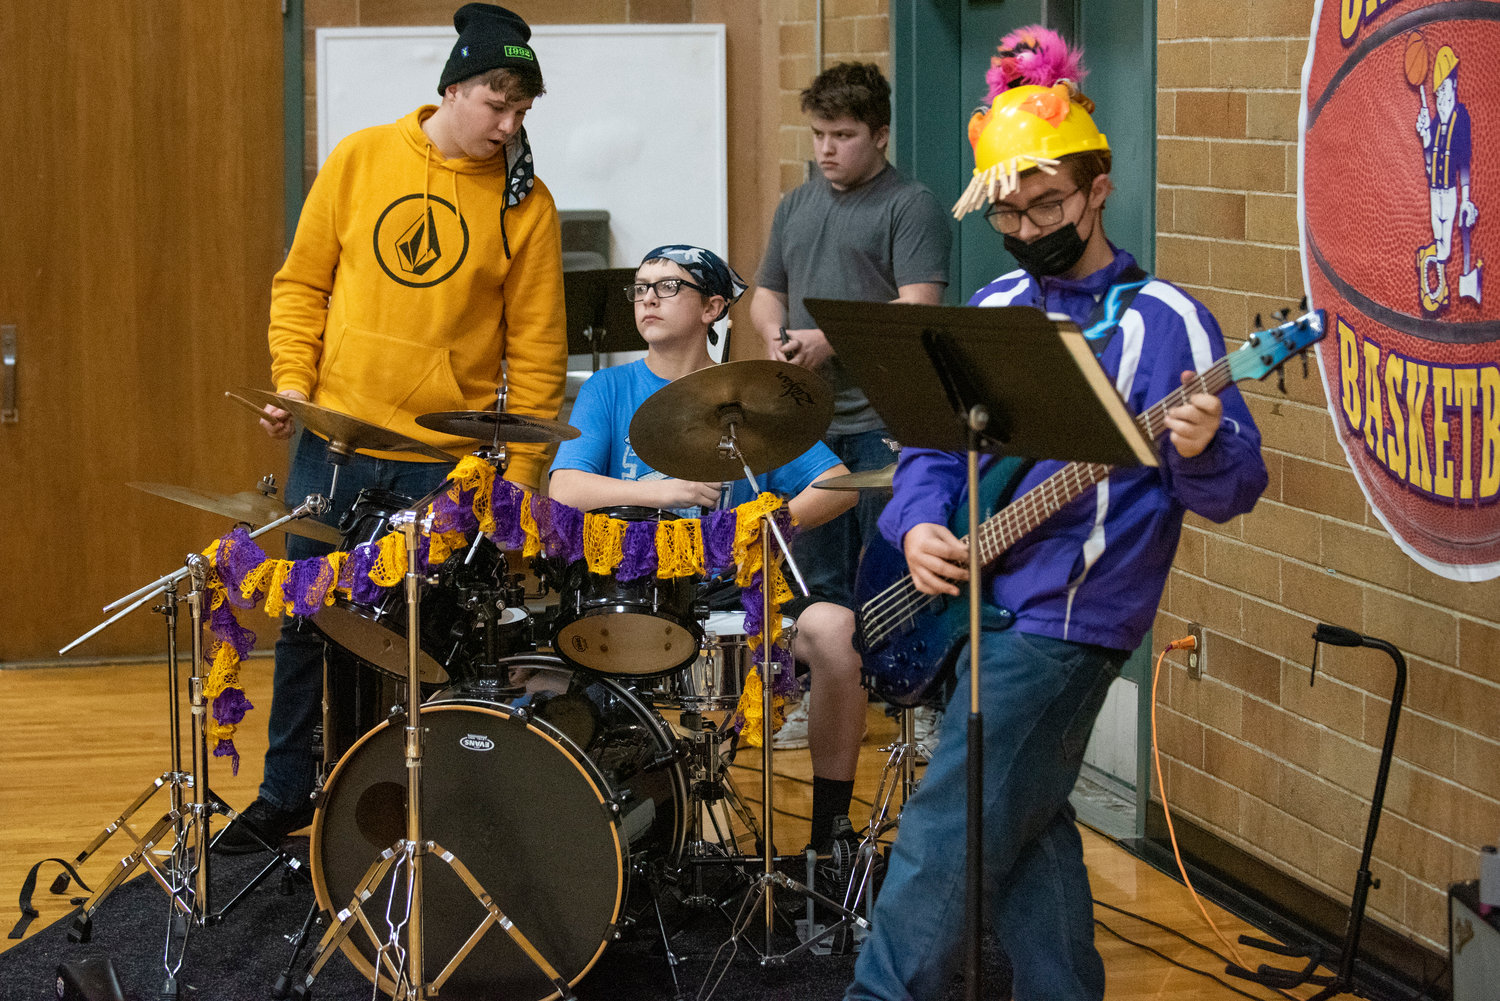 Onalaska's band plays during halftime of a game against Rainier on Jan. 20.